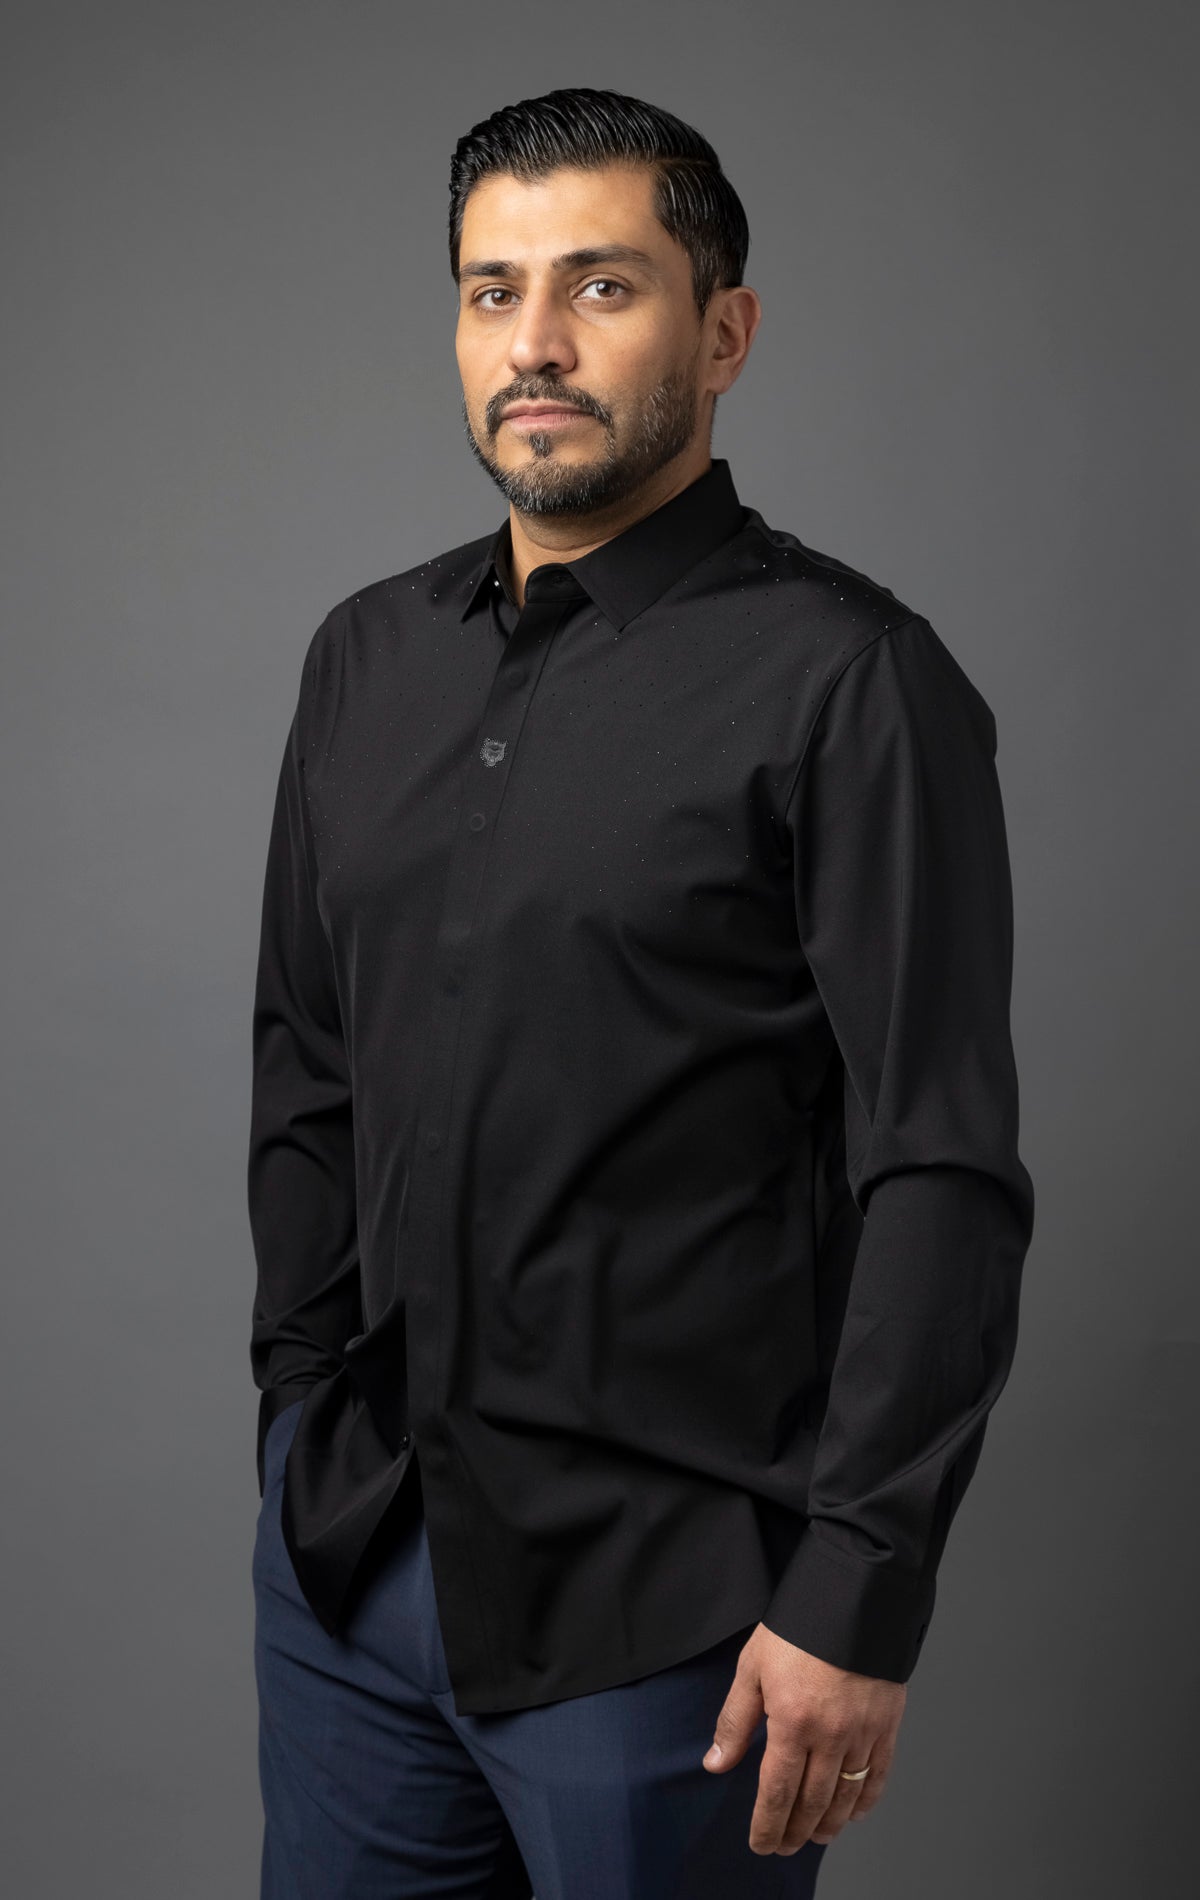 Men's formal black button-up shirt with long sleeves.